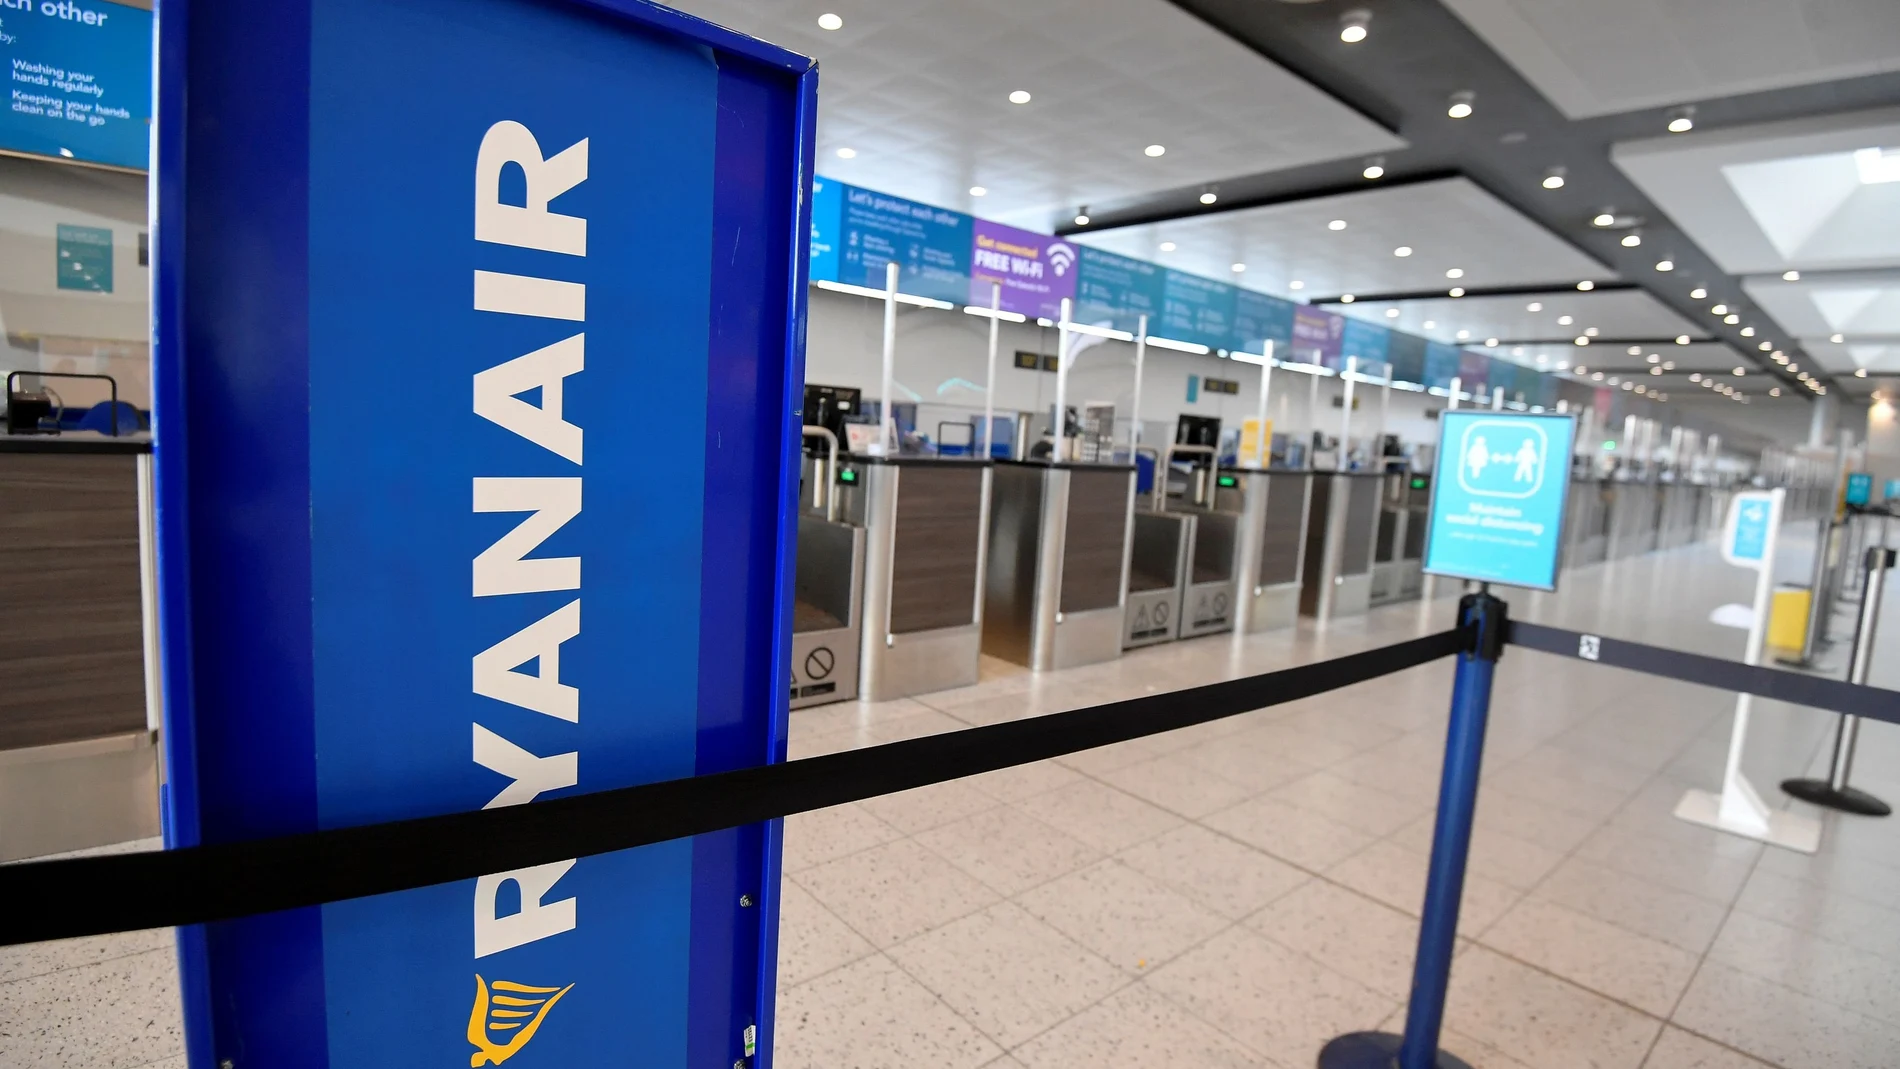 FILE PHOTO: Ryanair sign is seen at the check-in area at Gatwick Airport, in Gatwick